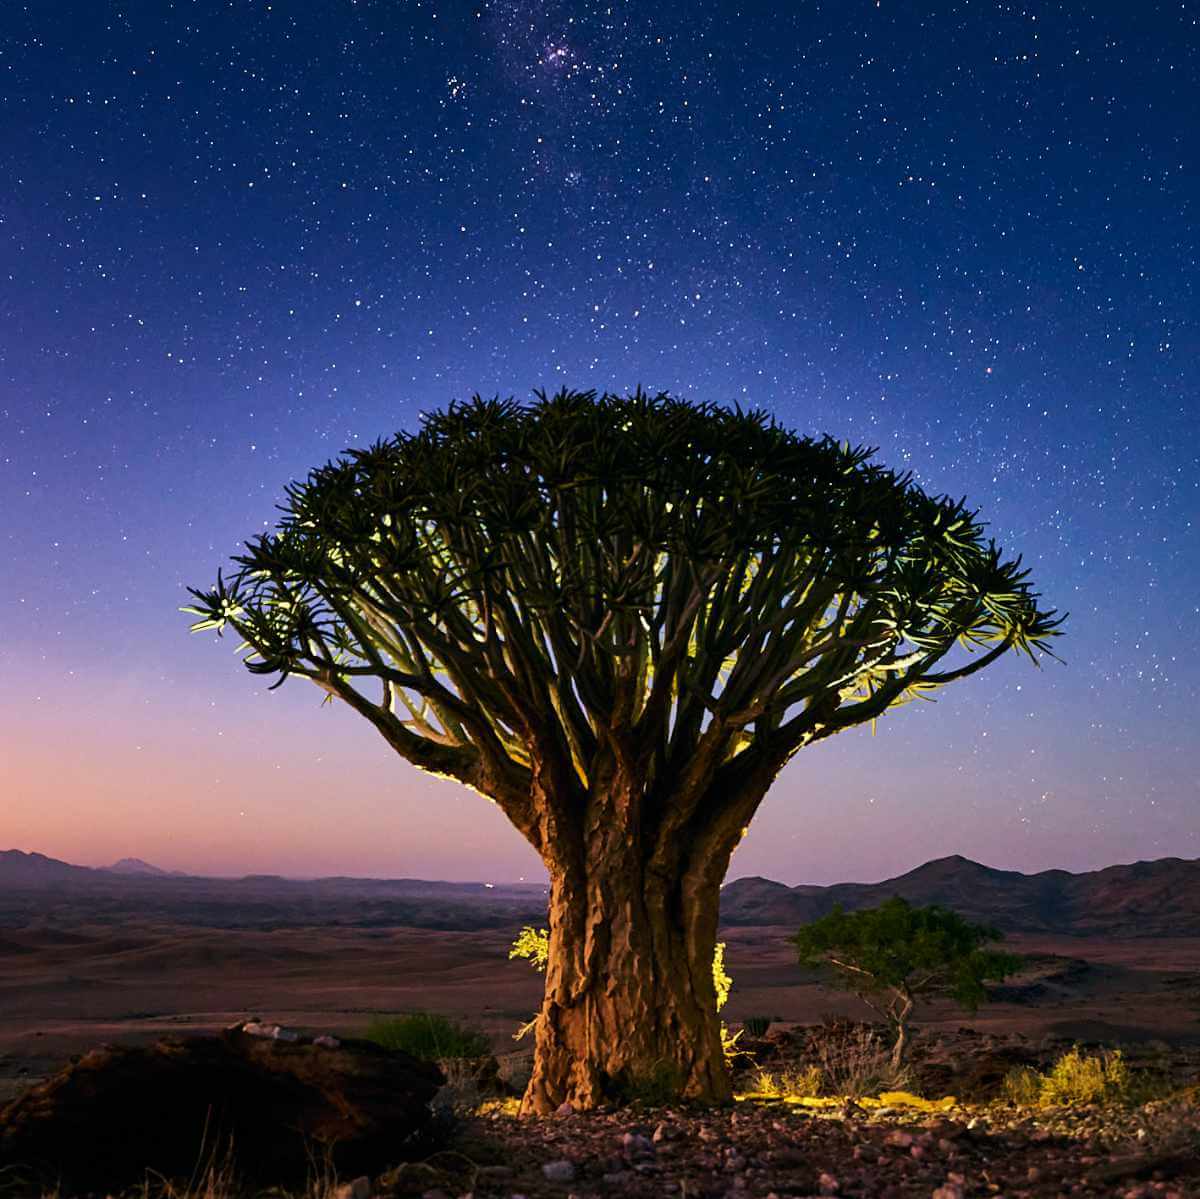 A quiver tree in the light pre-dawn under the clear African night sky